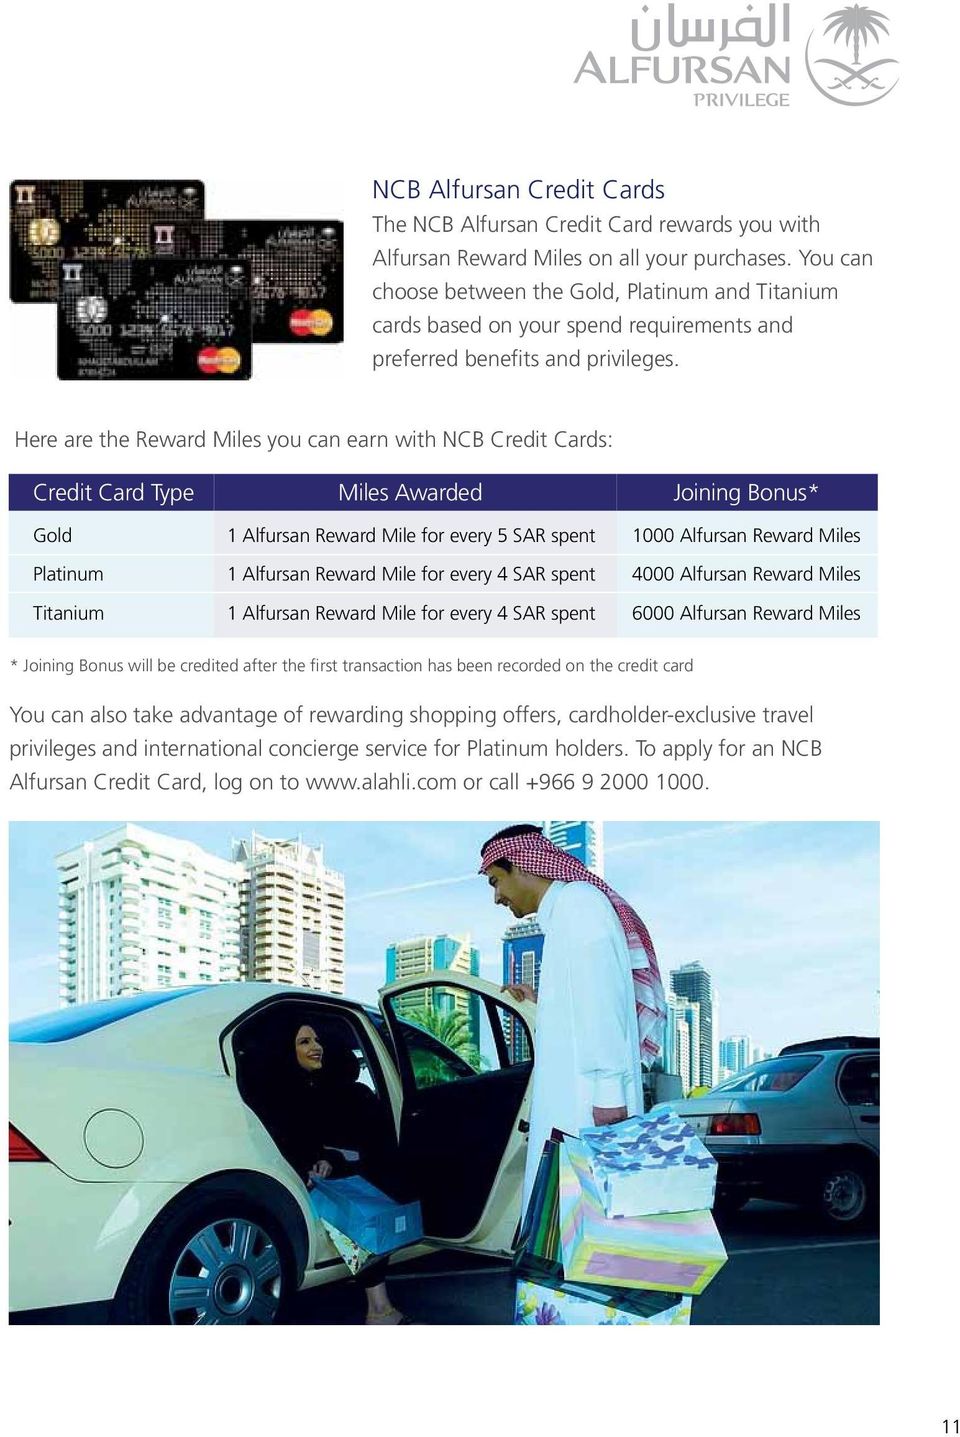 Here are the Reward Miles you can earn with NCB Credit Cards: Credit Card Type Miles Awarded Joining Bonus* Gold Platinum Titanium 1 Alfursan Reward Mile for every 5 SAR spent 1 Alfursan Reward Mile